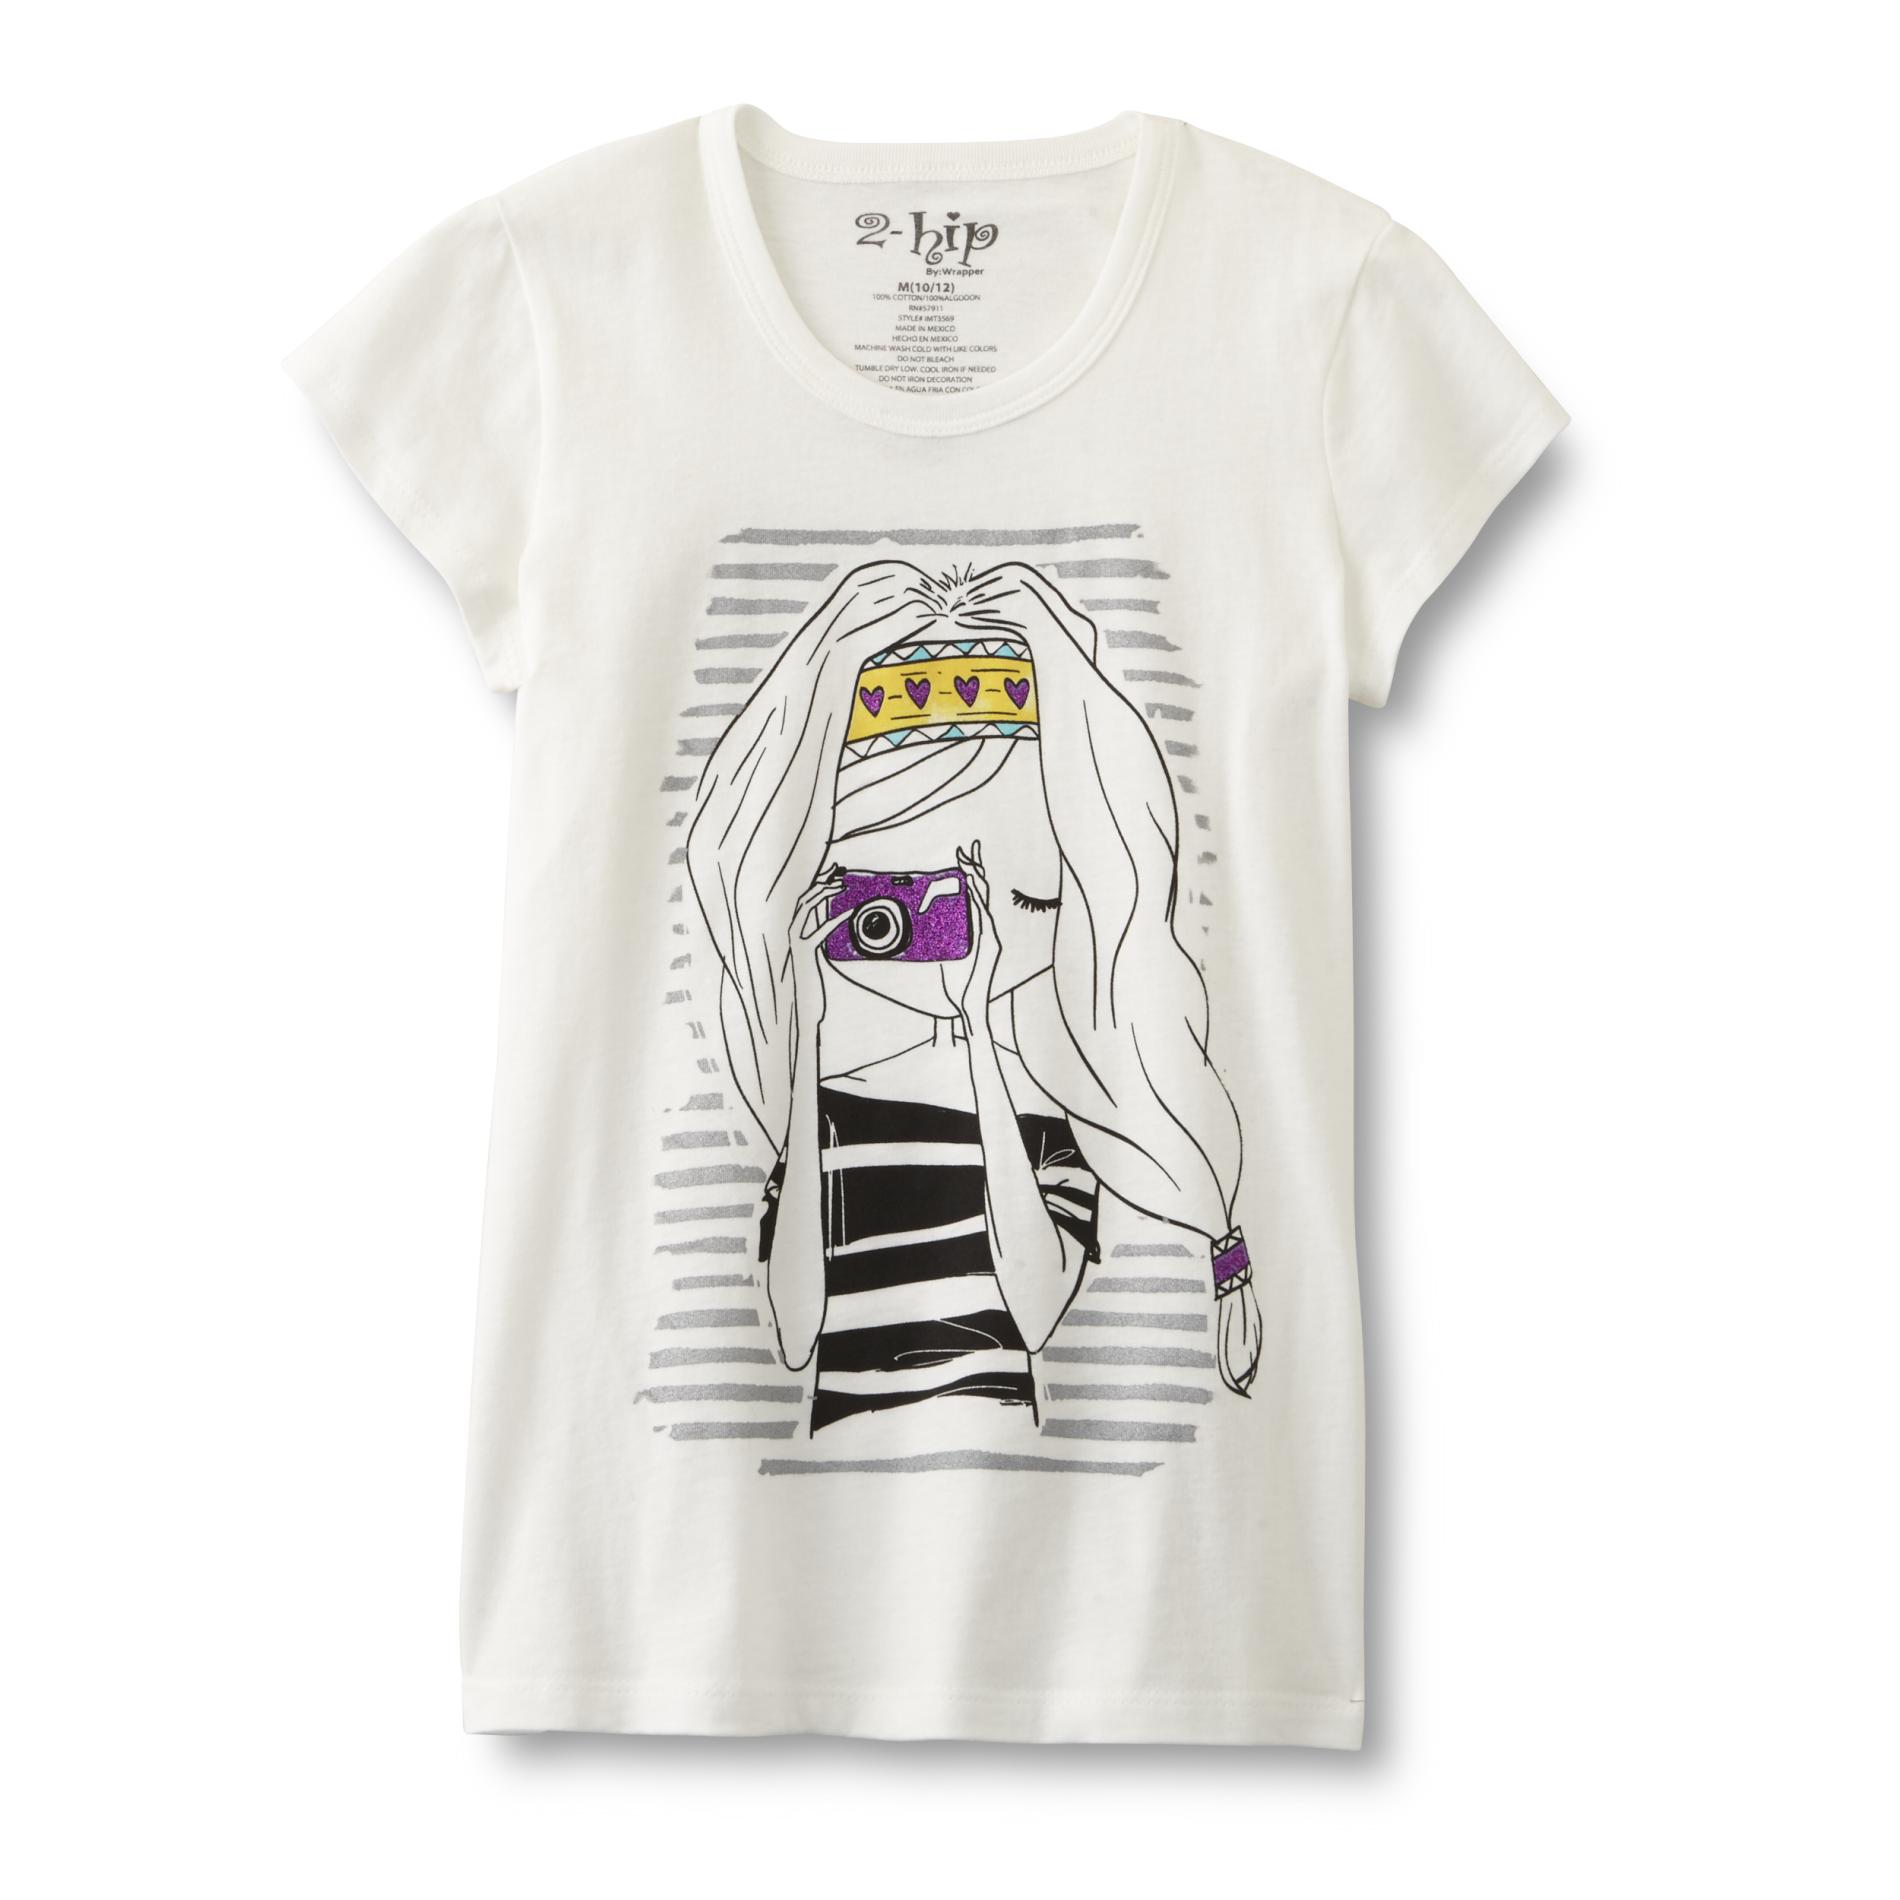 Wrapper Girl's Graphic T-Shirt - Camera